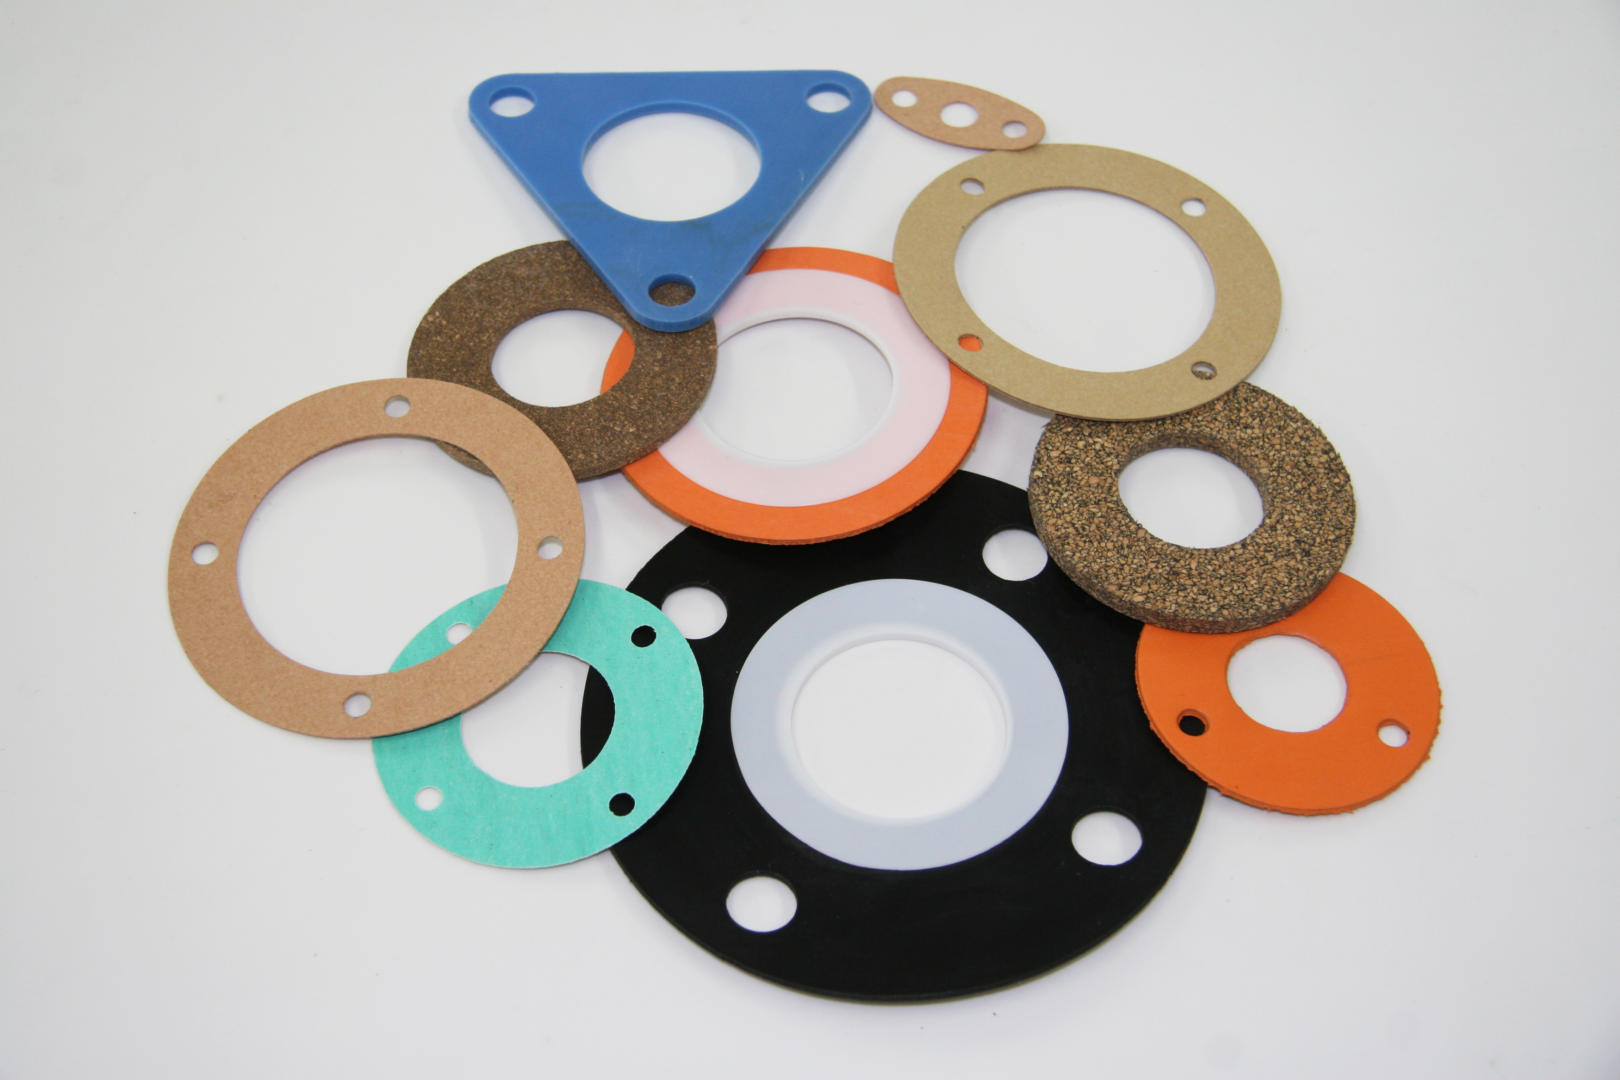 How to Select the Right Flange Gasket?